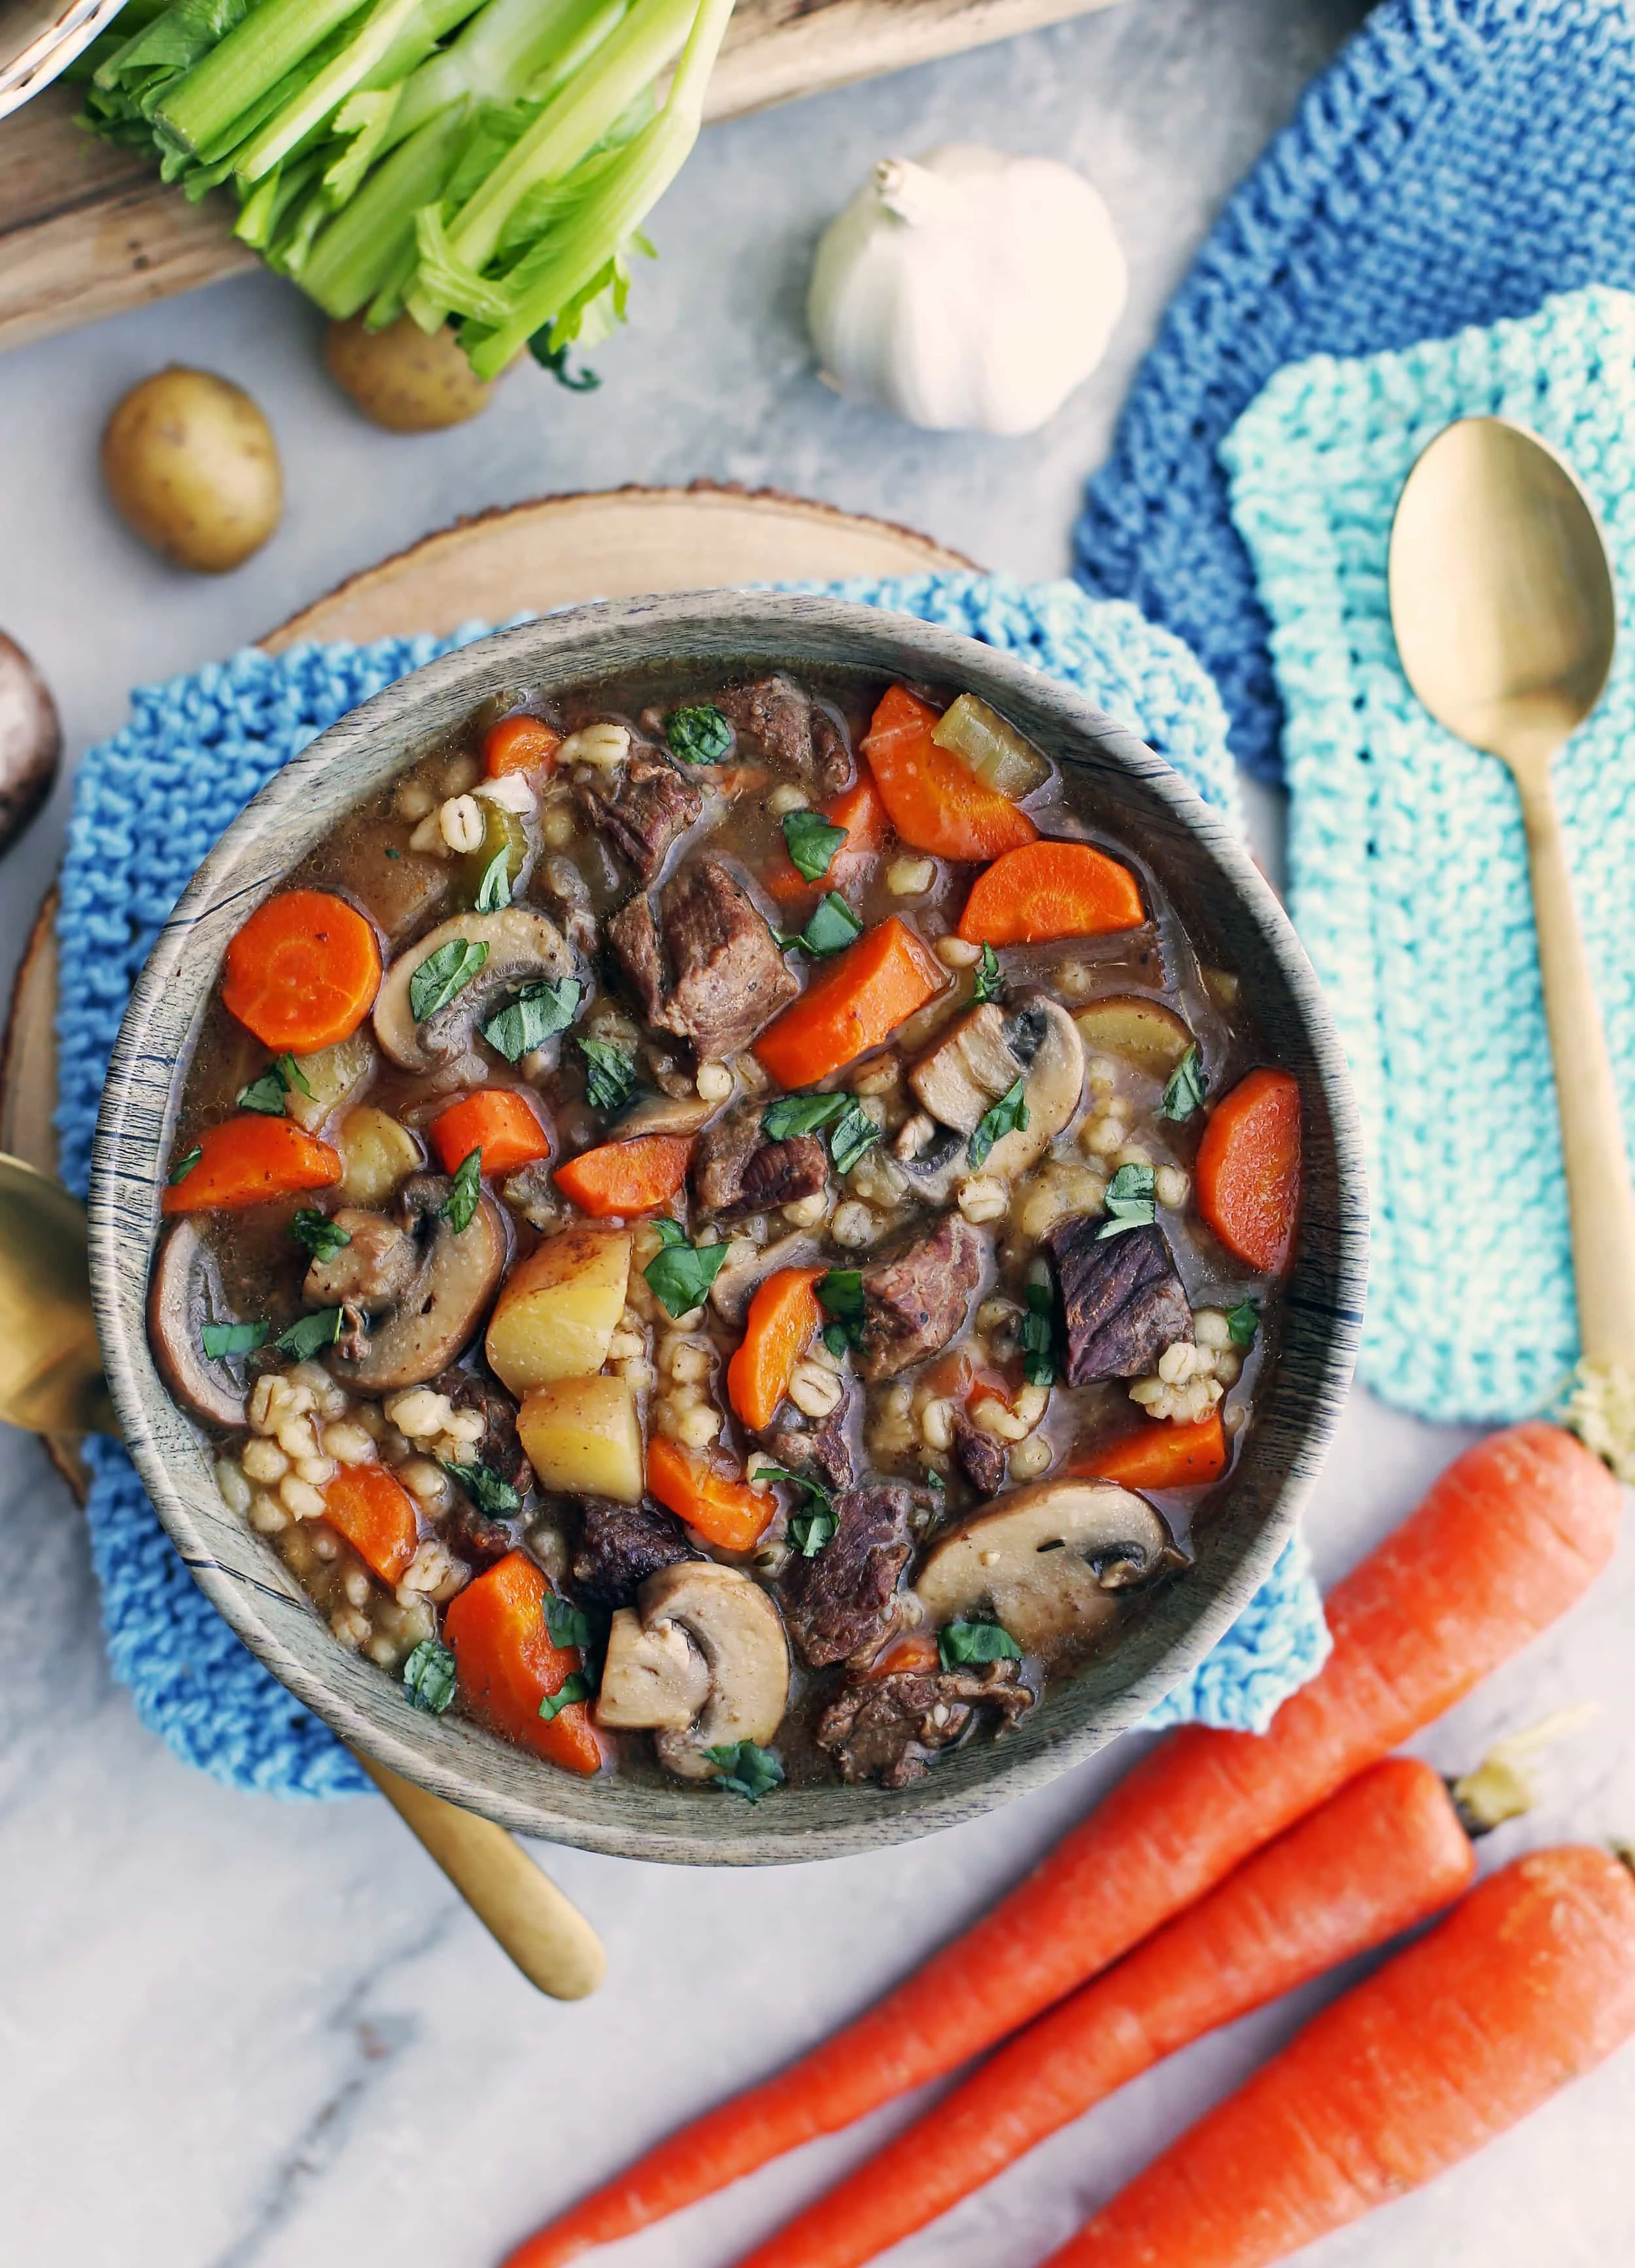 Beef barley mushroom soup with fresh vegetables (e.g. carrots, celery, potatoes, onion) in a bowl.